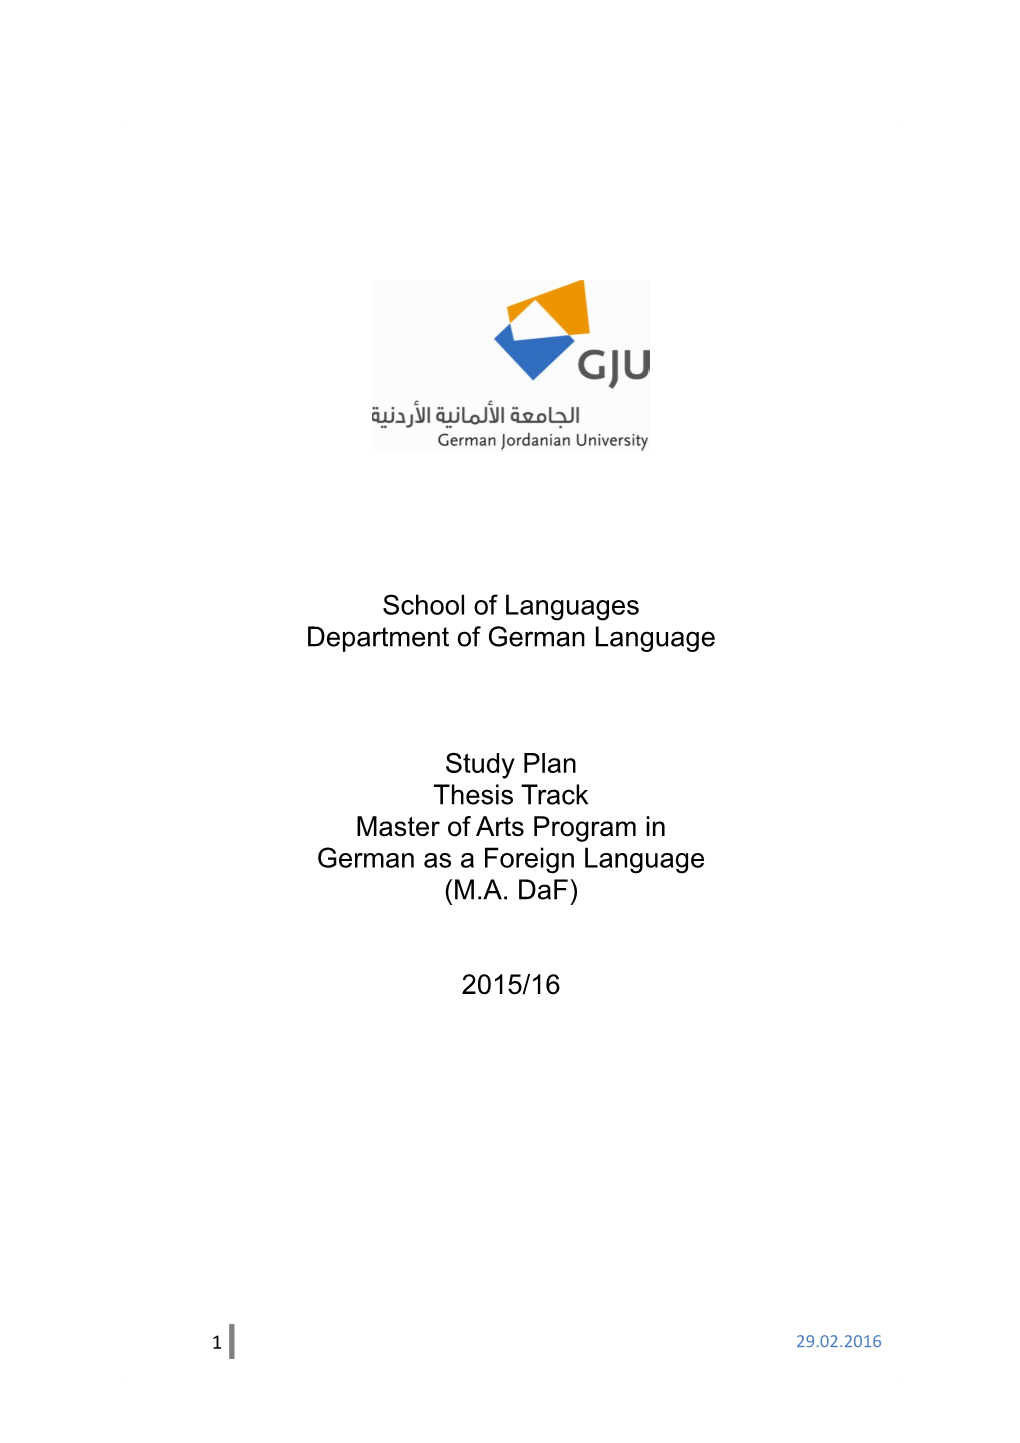 Master of Arts Program in German As a Foreign Language